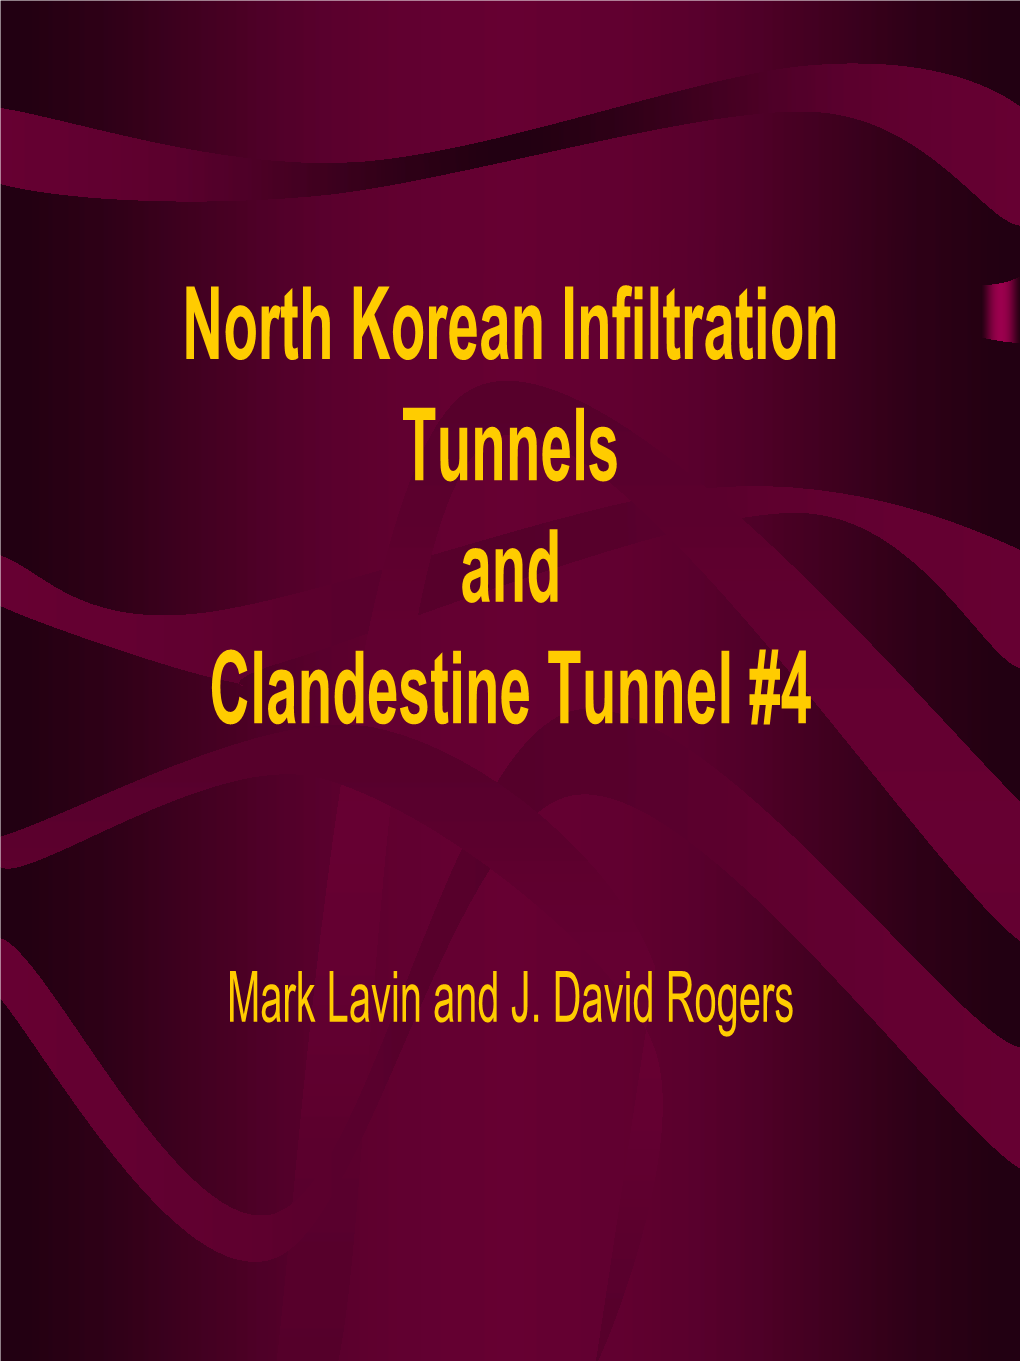 North Korean Infiltration Tunnels and Clandestine Tunnel #4